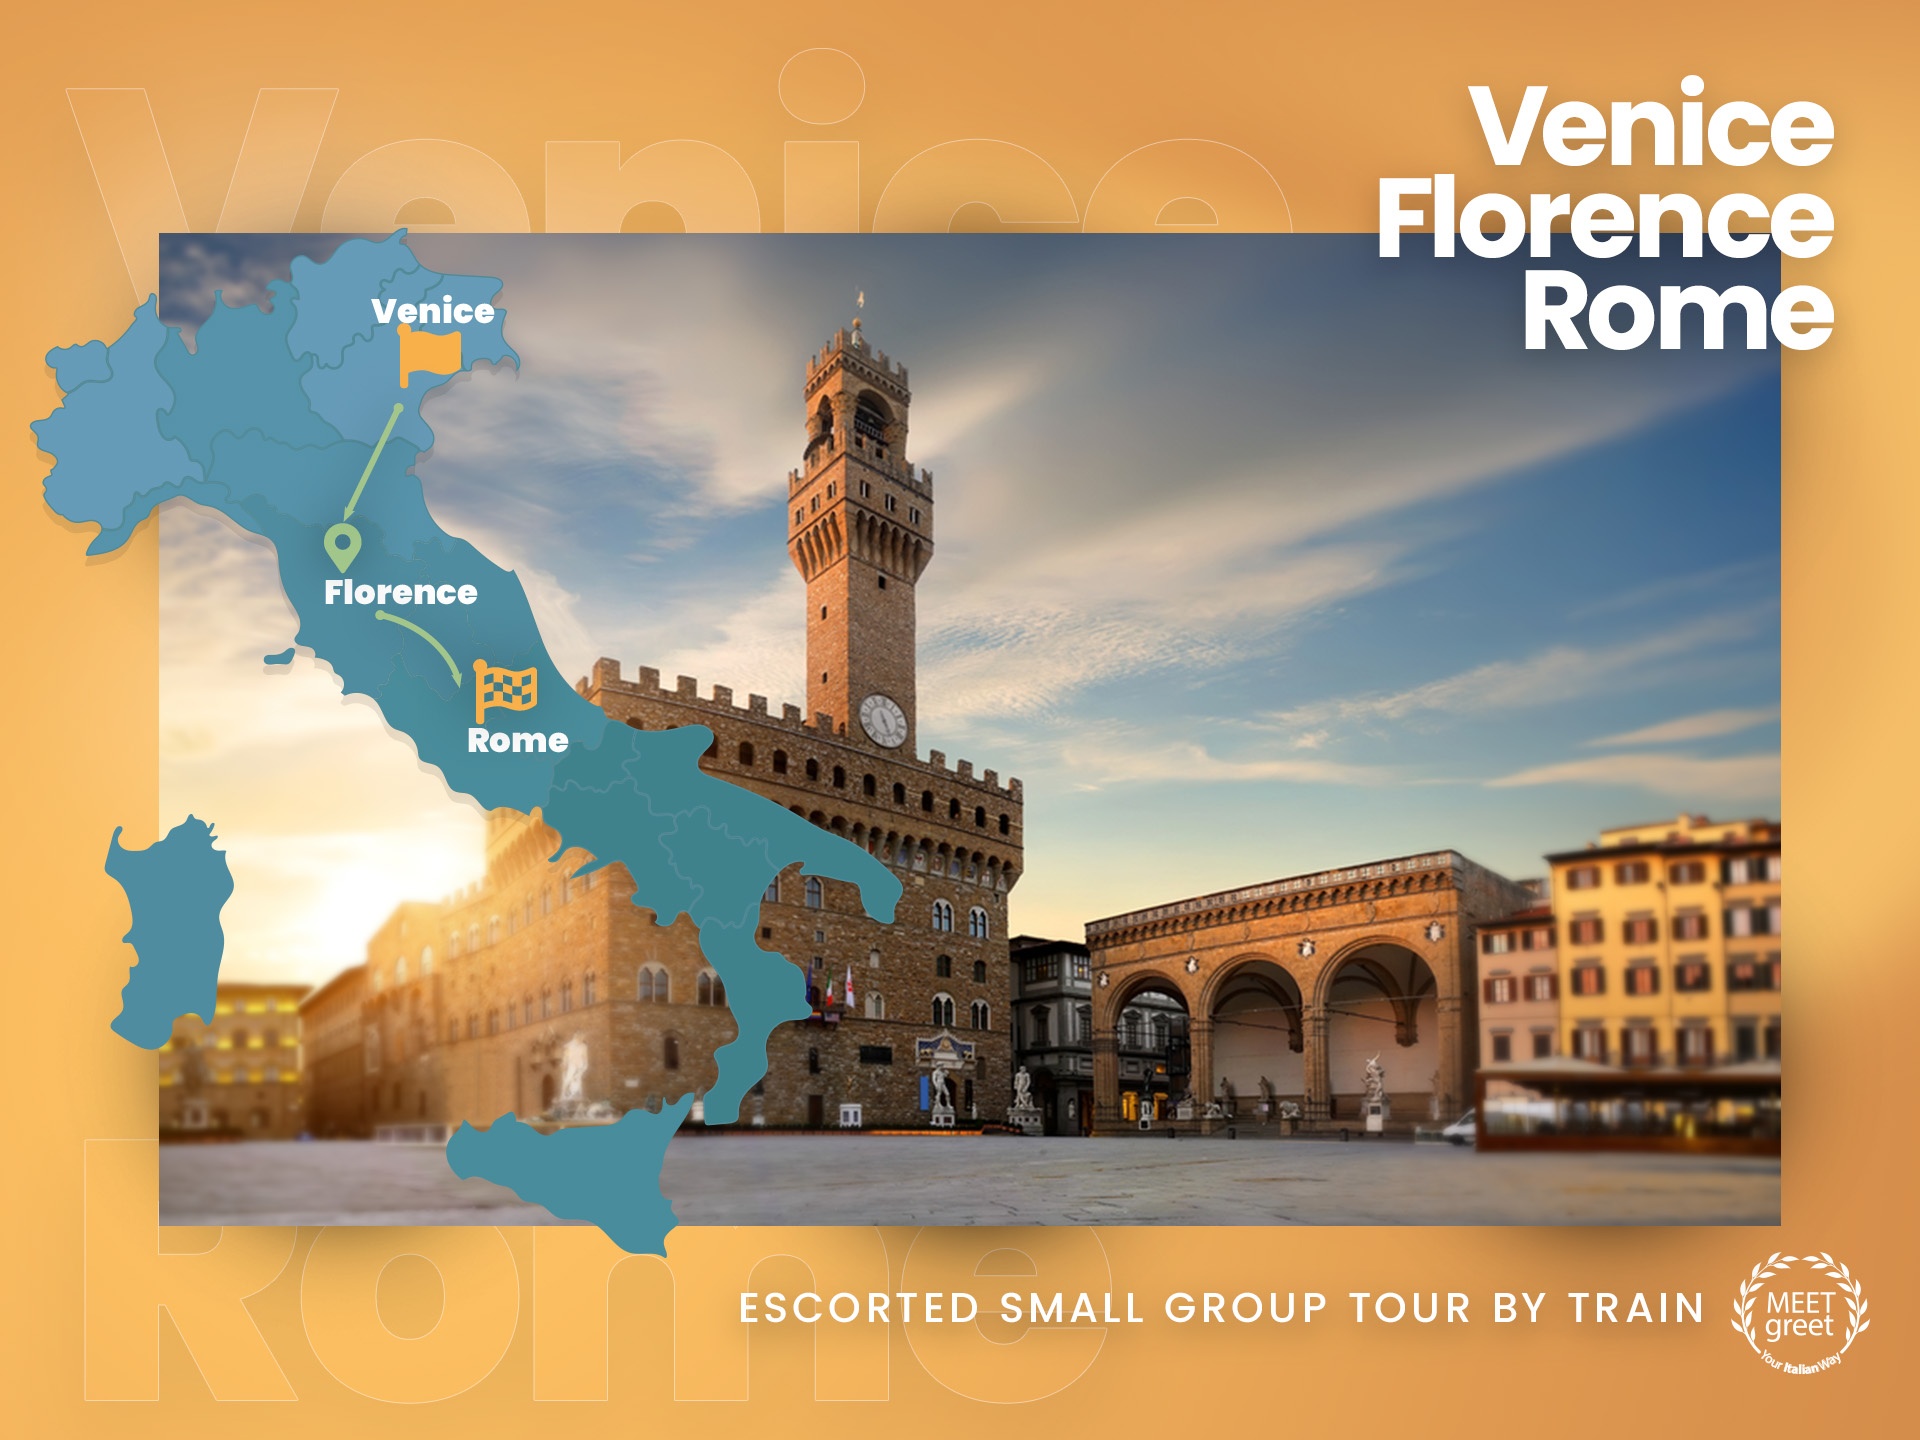 tourhub | Meet & Greet Italy | Venice, Florence and Rome escorted small group by train | Tour Map